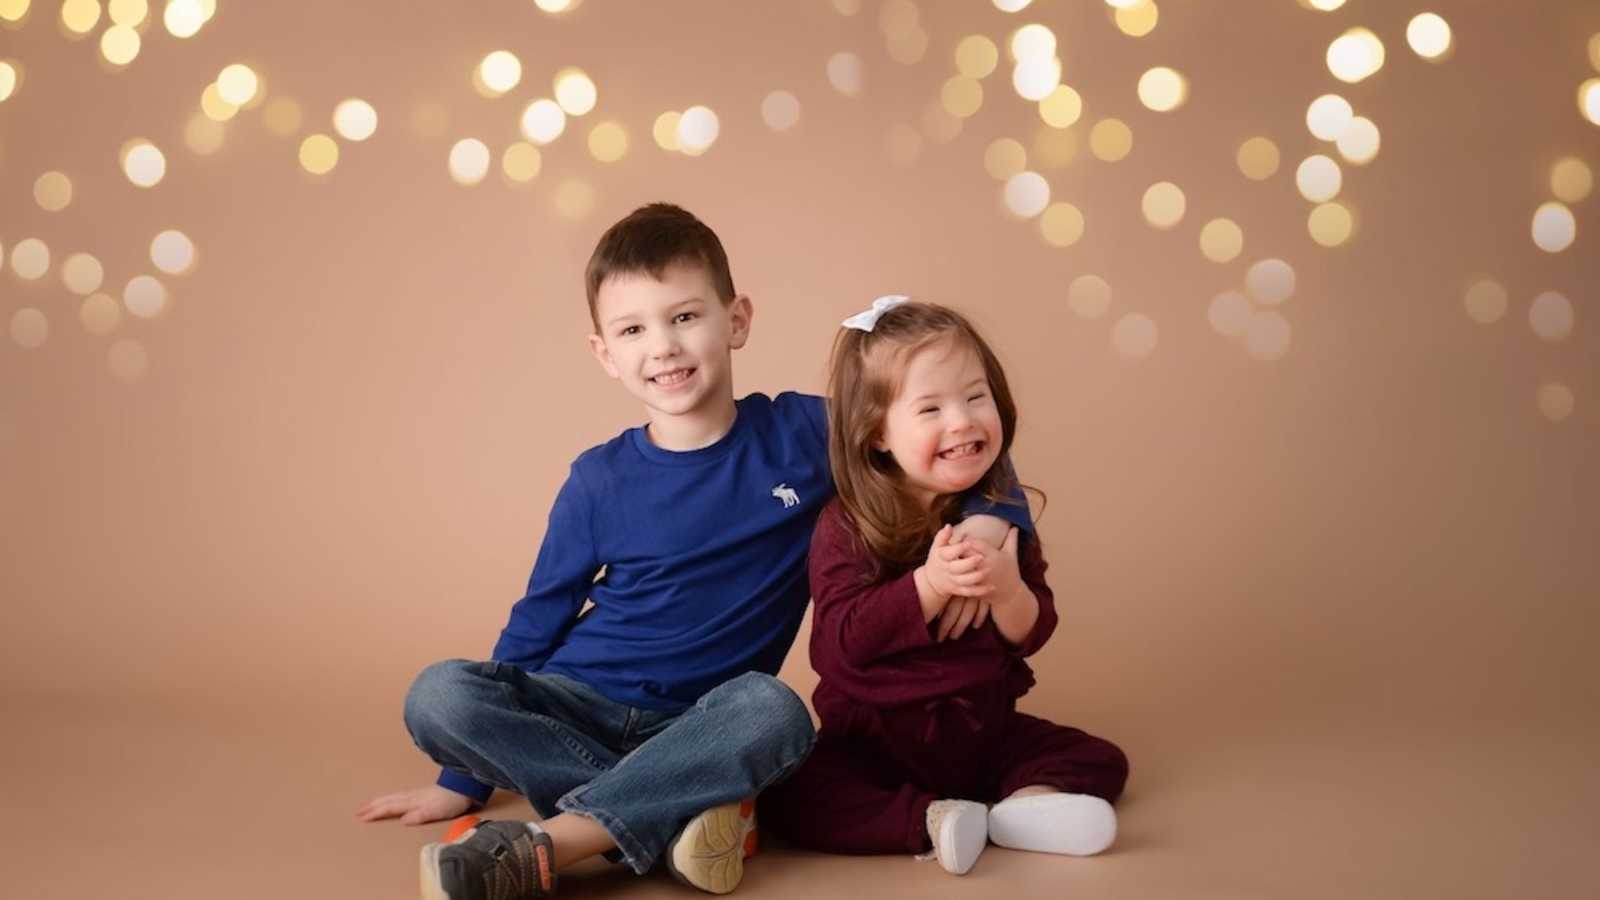 Little boy sits on ground with arm around his little sister with down syndrome for photoshoot